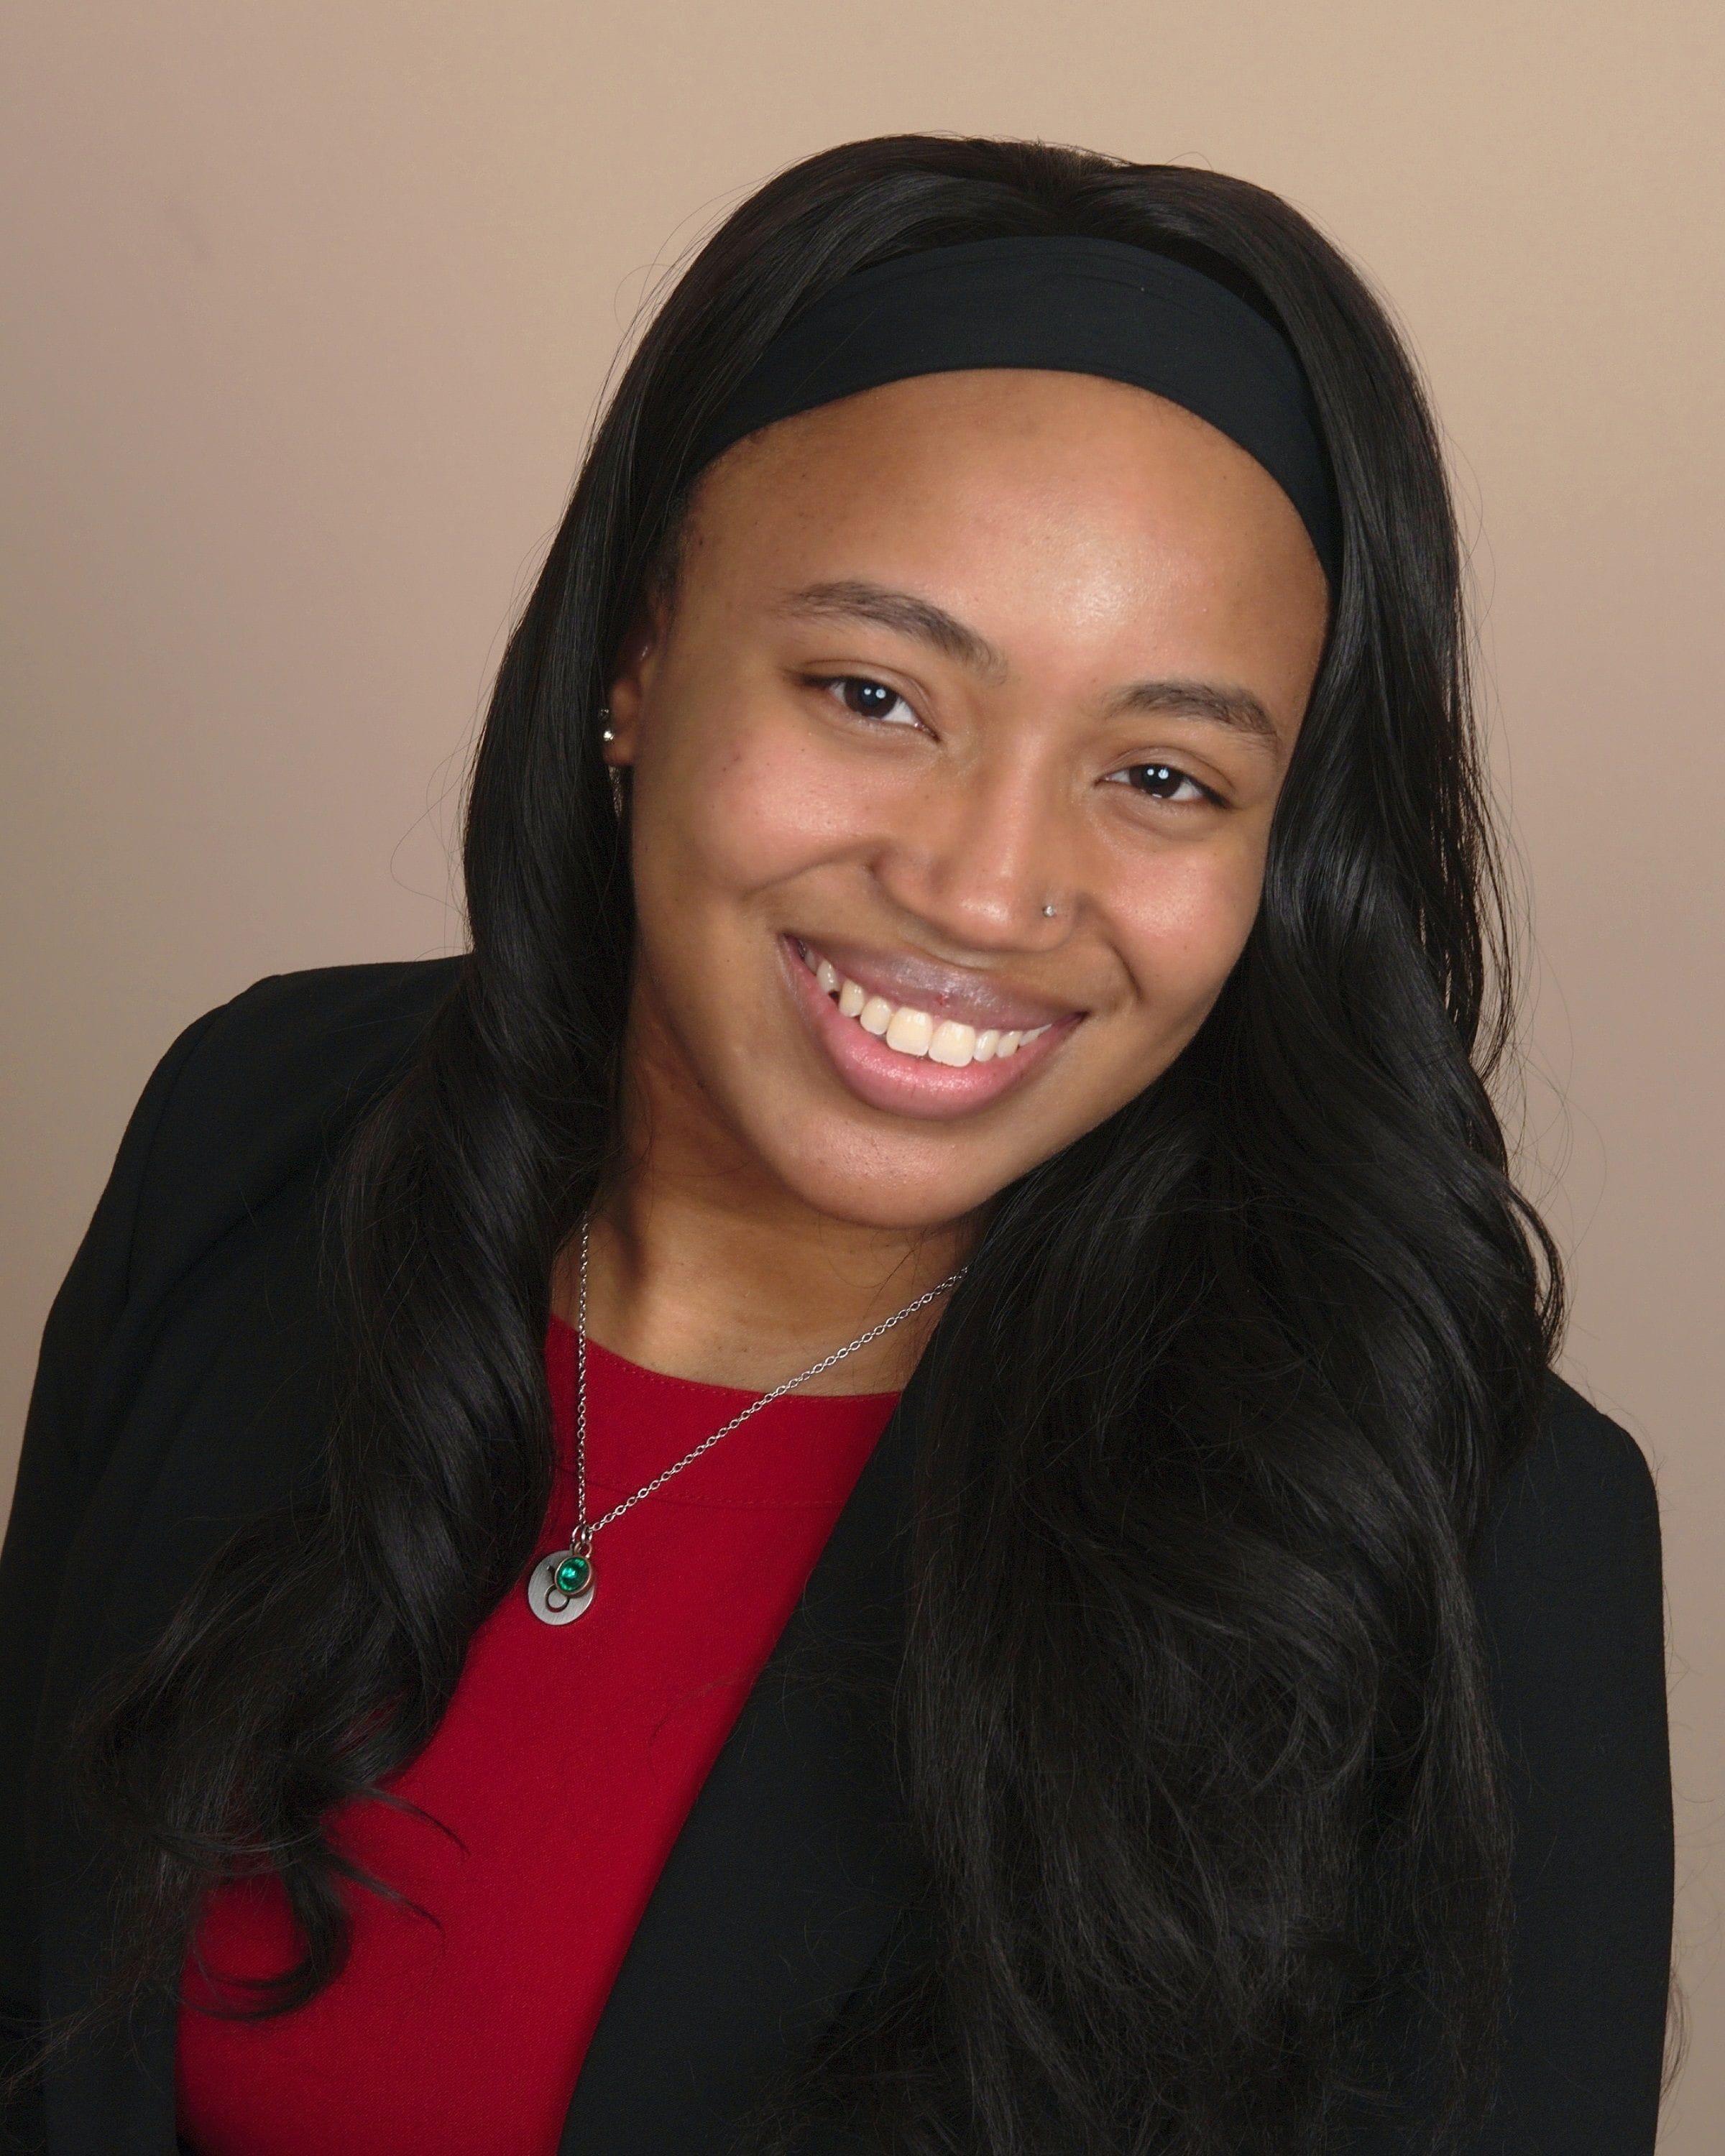 Dominique Hamilton is a Paralegal at the Law Office of Michelle Broughton-Fountain. She graduated with an Associate's Degree in Paralegal Studies and also with